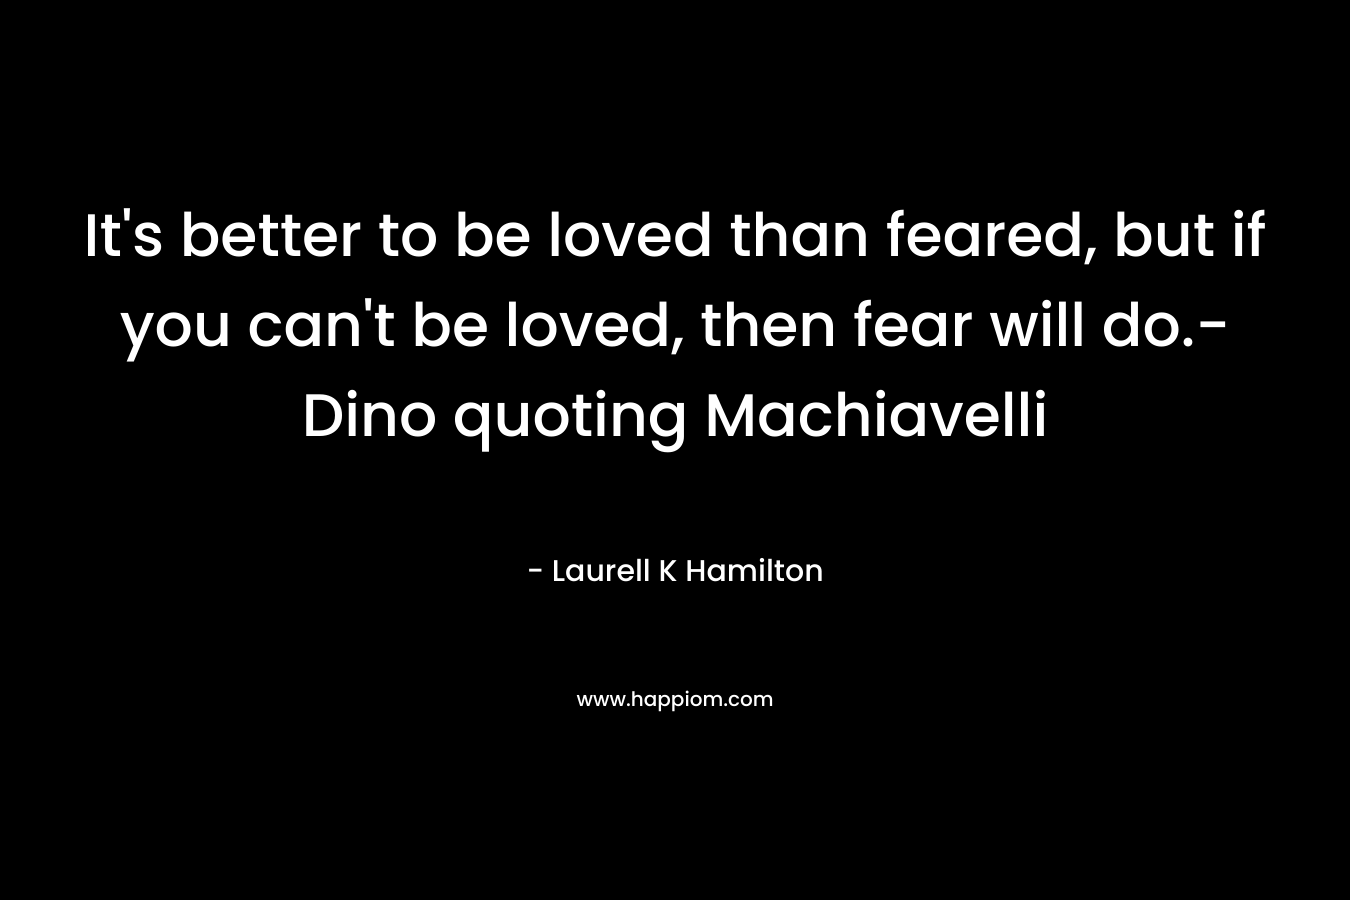 It's better to be loved than feared, but if you can't be loved, then fear will do.-Dino quoting Machiavelli